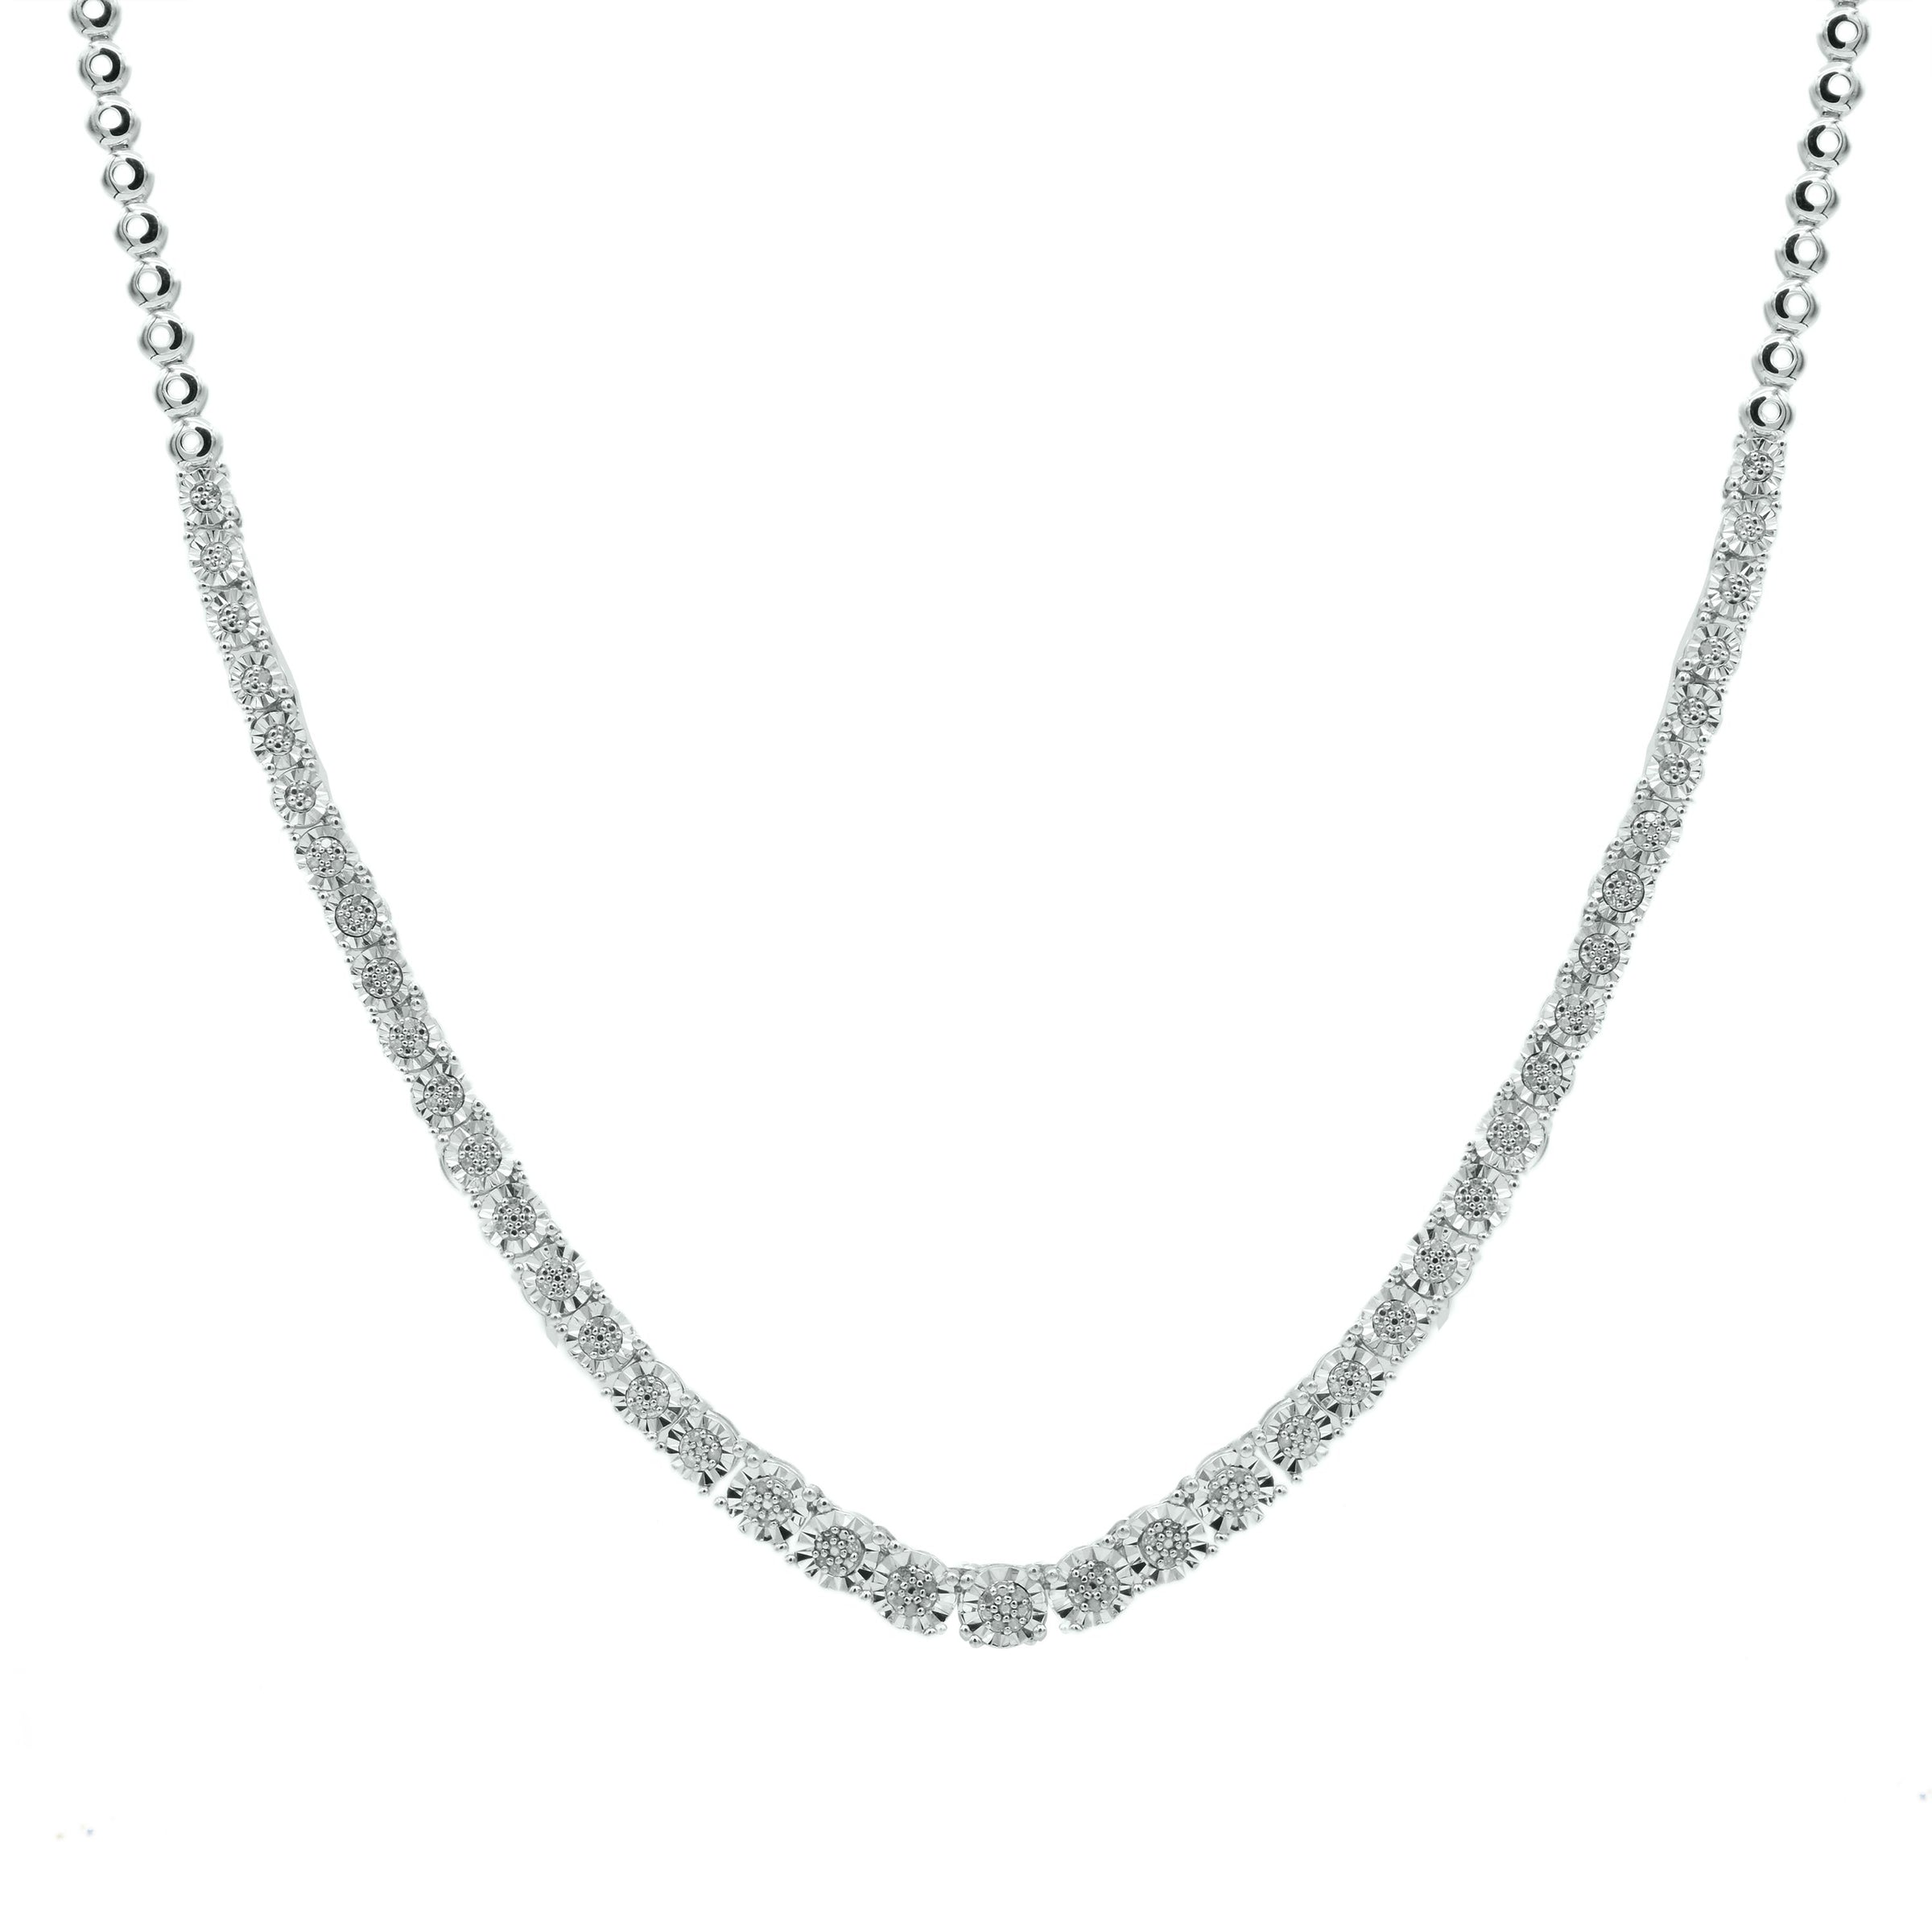 Brilliant Miracle Tennis Necklace with 1/2ct of Diamonds in Sterling Silver Necklaces Bevilles 